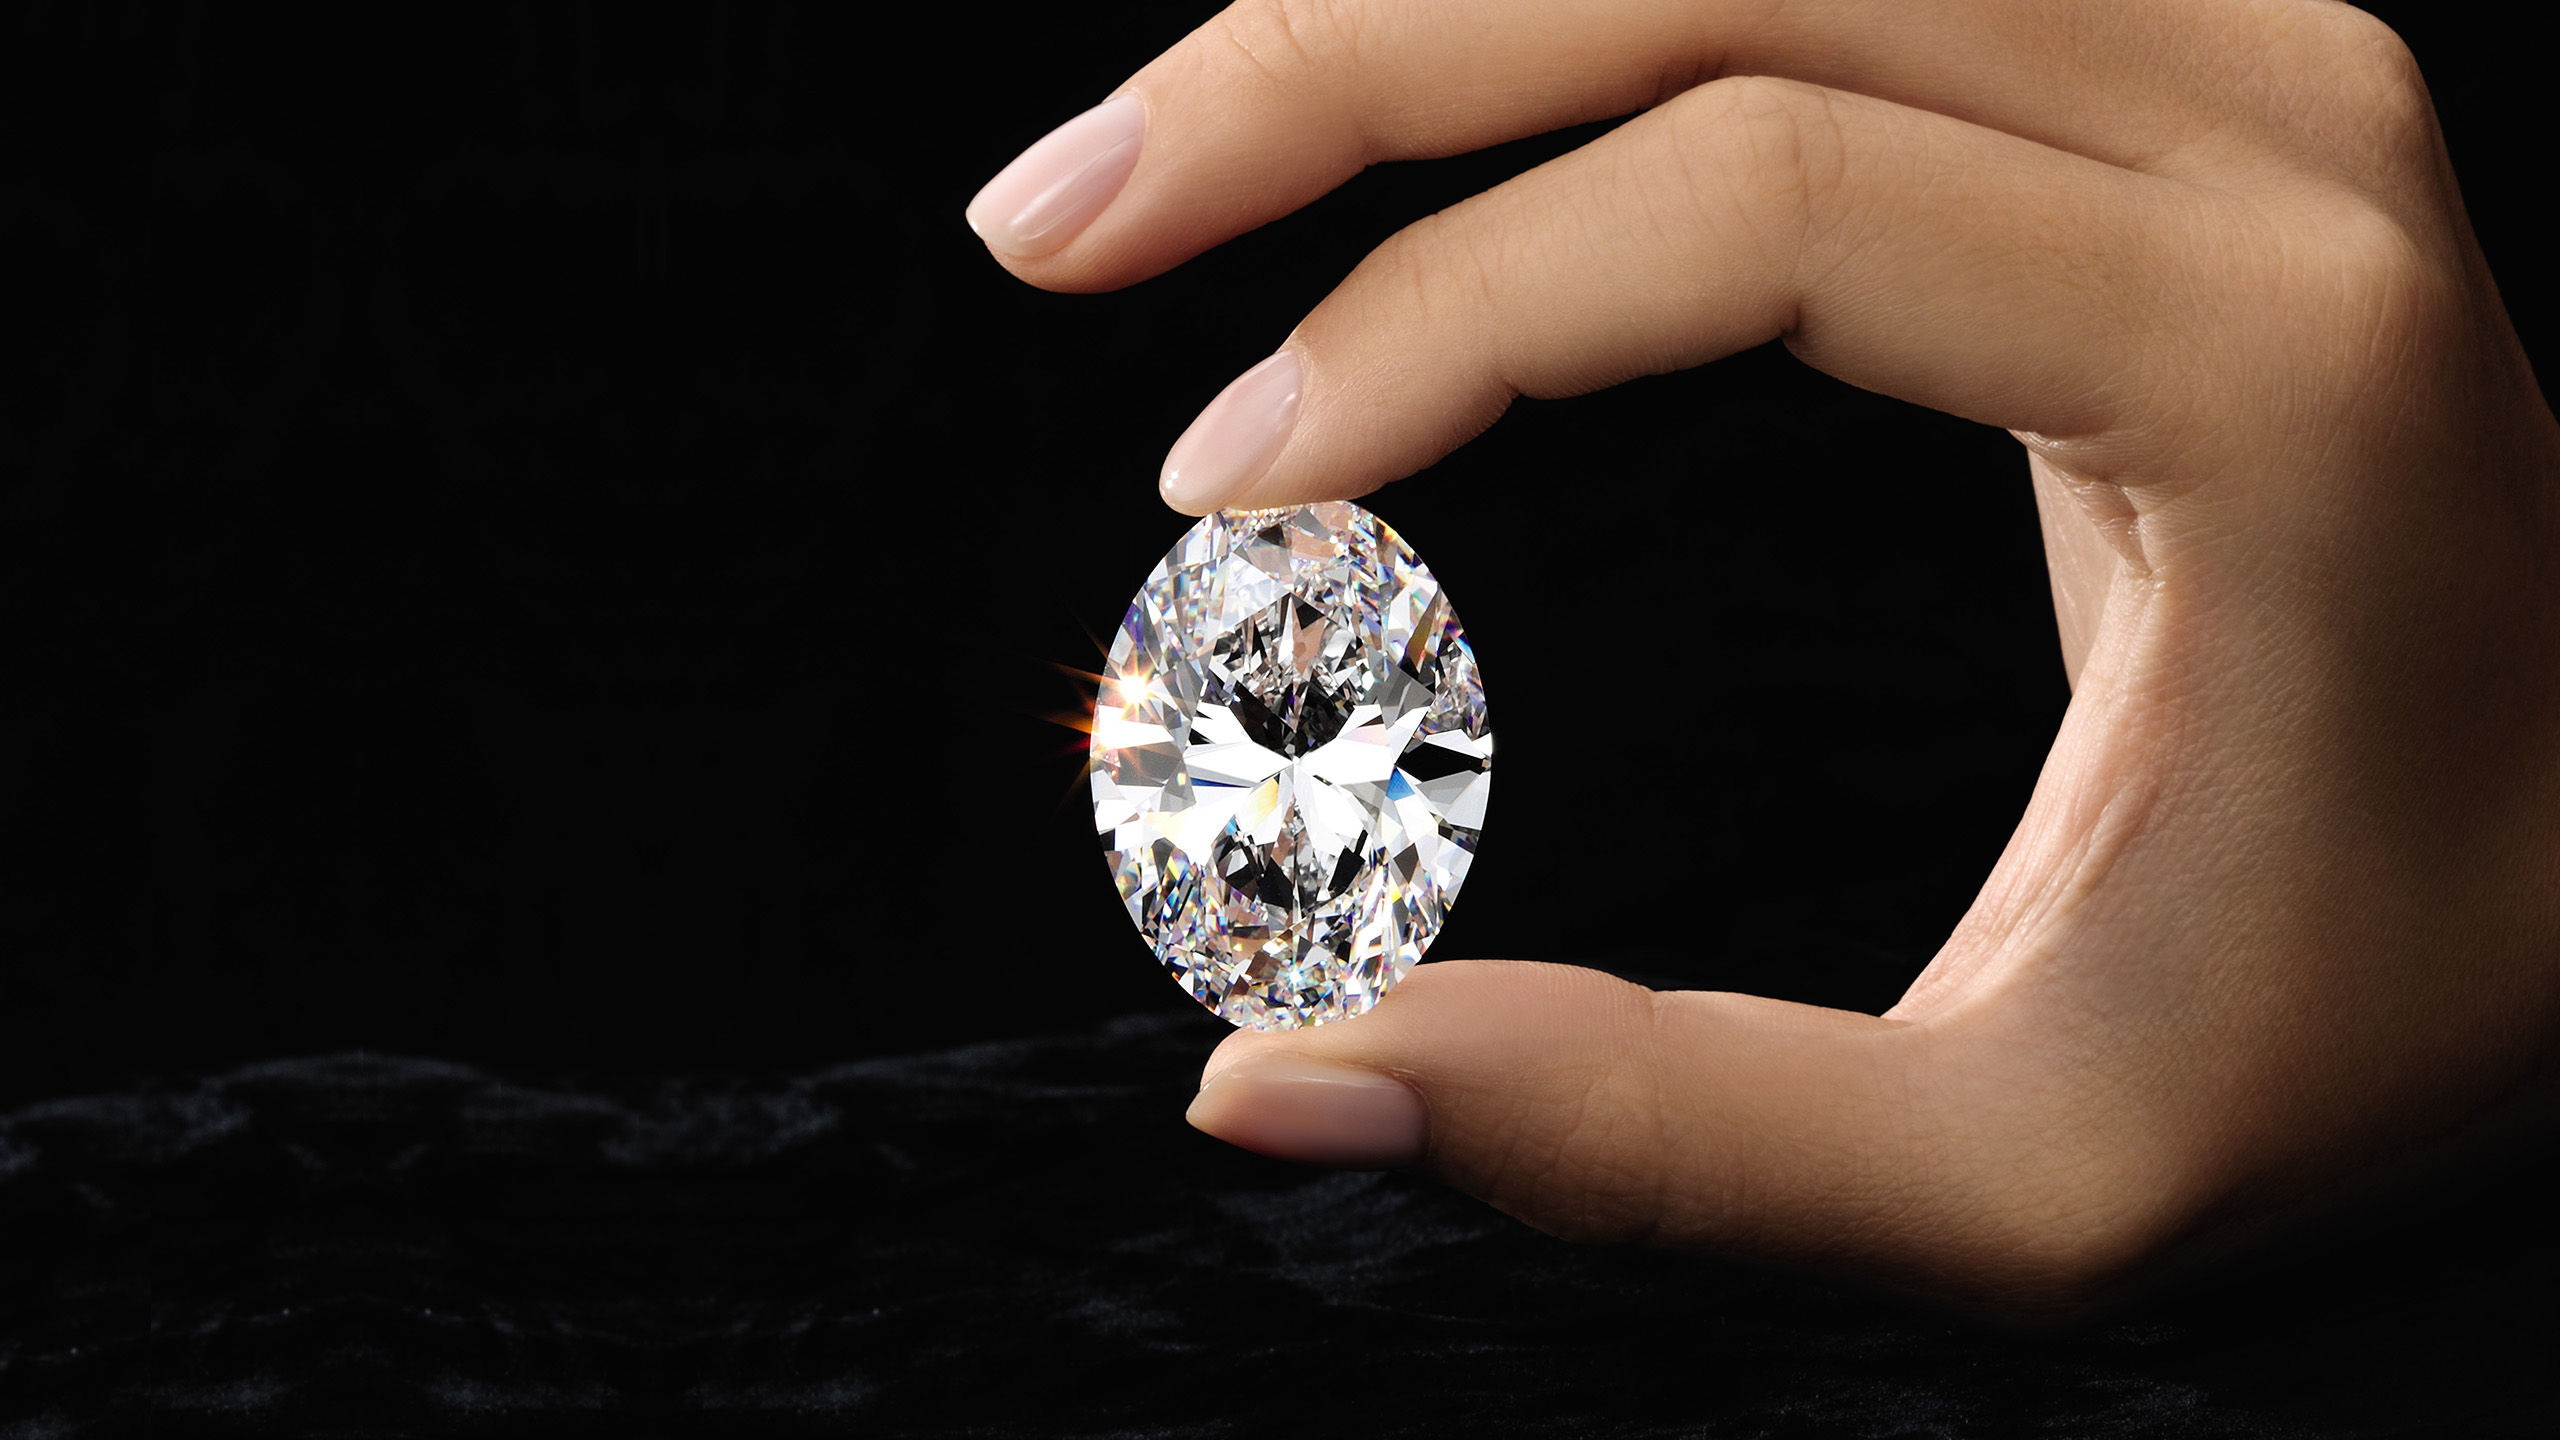 A spectacular 88.22-carat oval diamond has just landed in Hong Kong